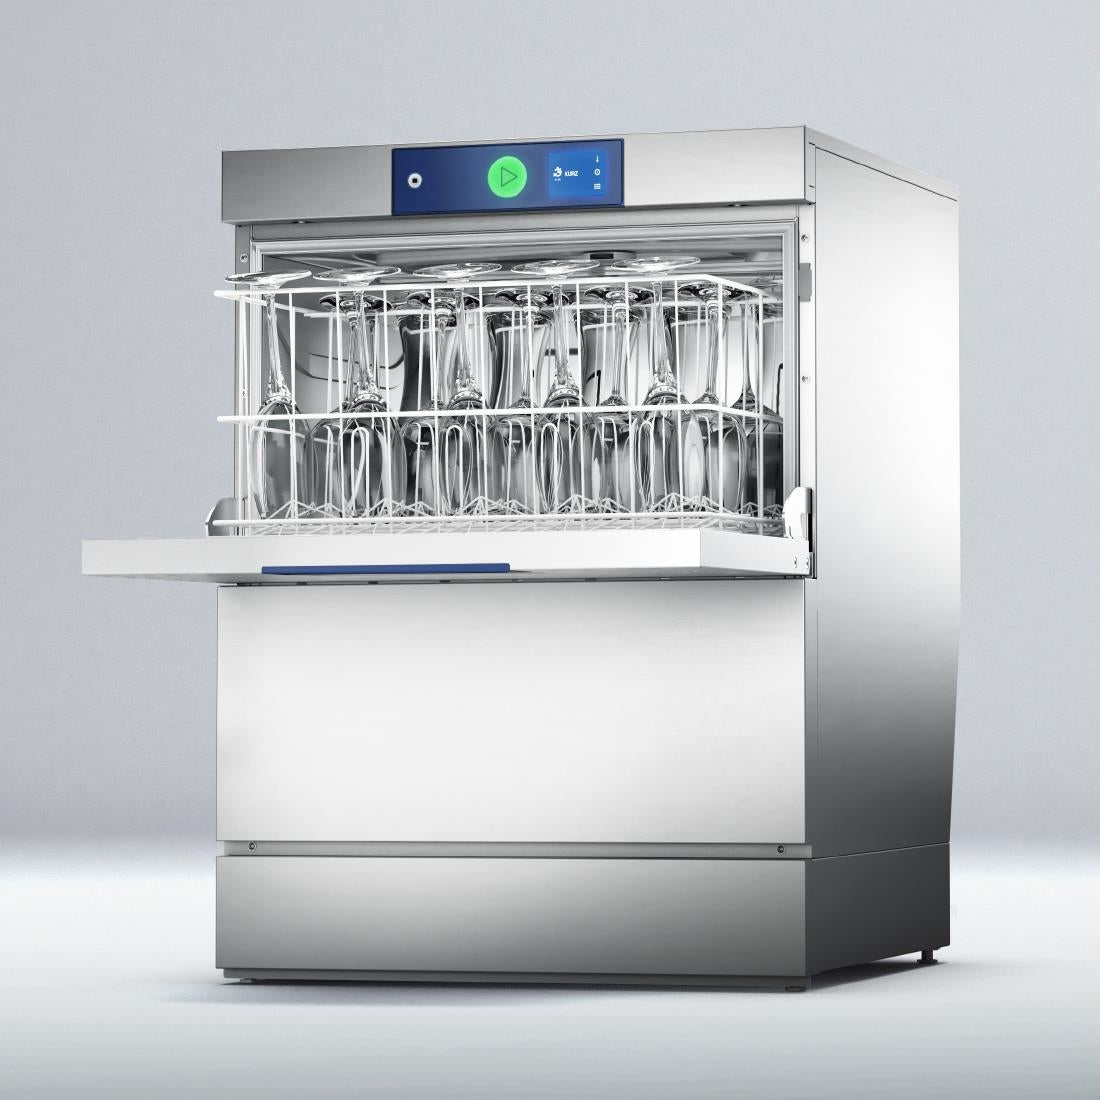 FT115 Hobart Glasswasher with Integrated Reverse Osmosis GXCROIW-11B